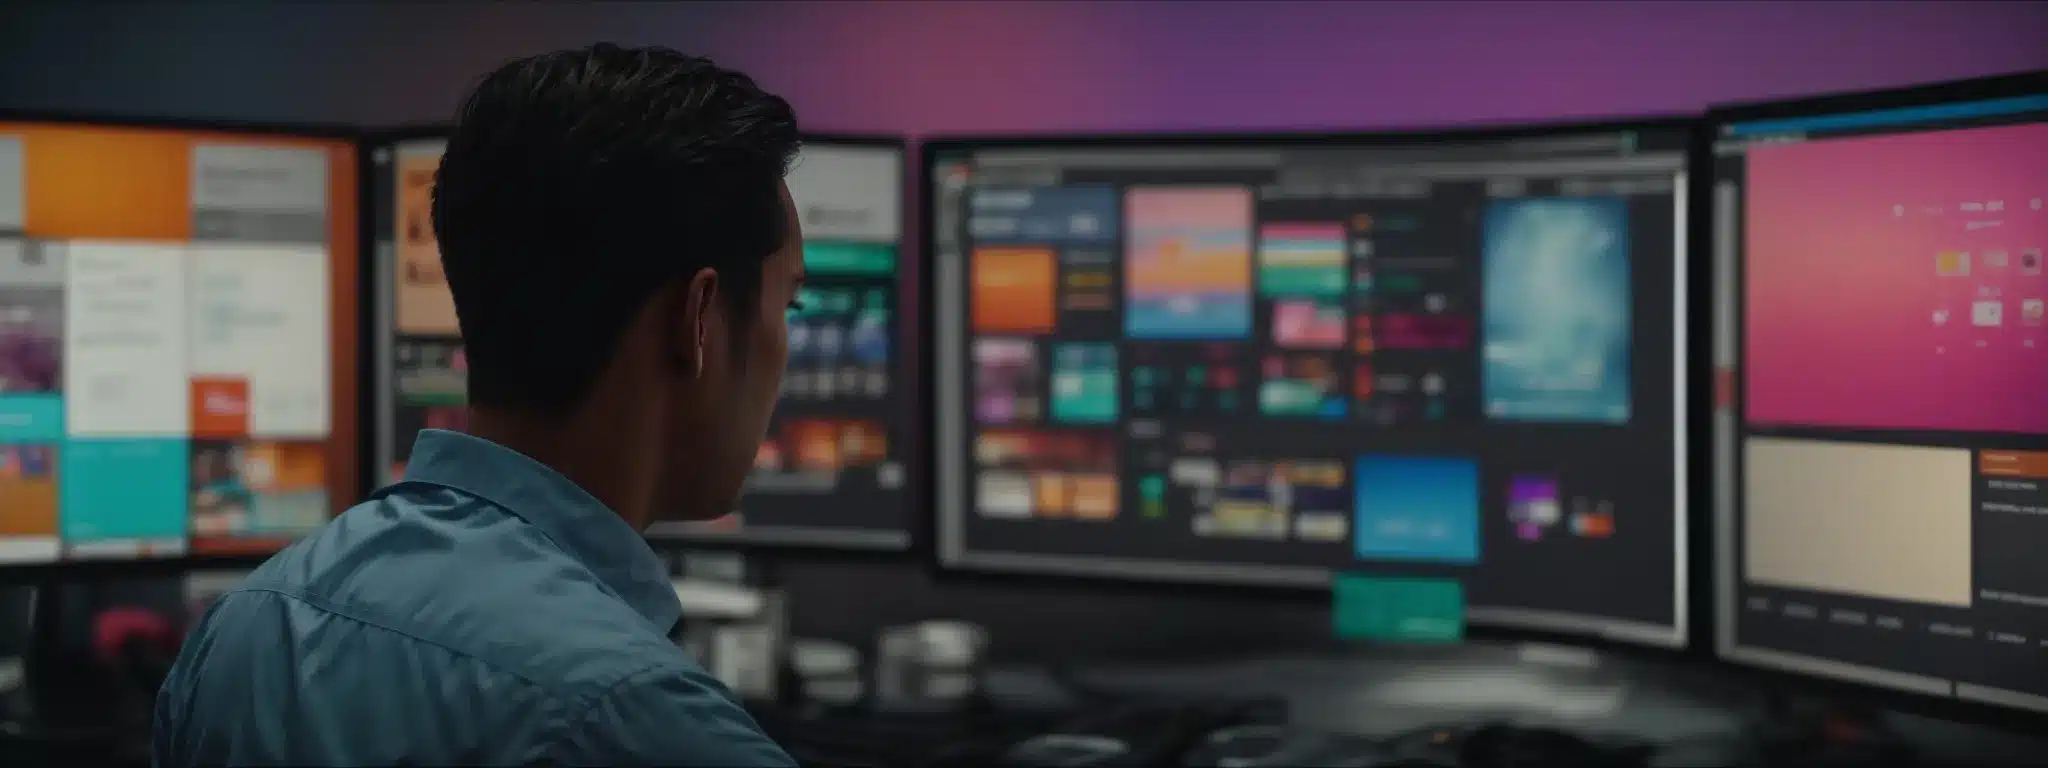 A Marketer Gazes At A Screen Displaying A Colorful Array Of Crm Interface Options, Radiating A Sense Of Holistic Connection.